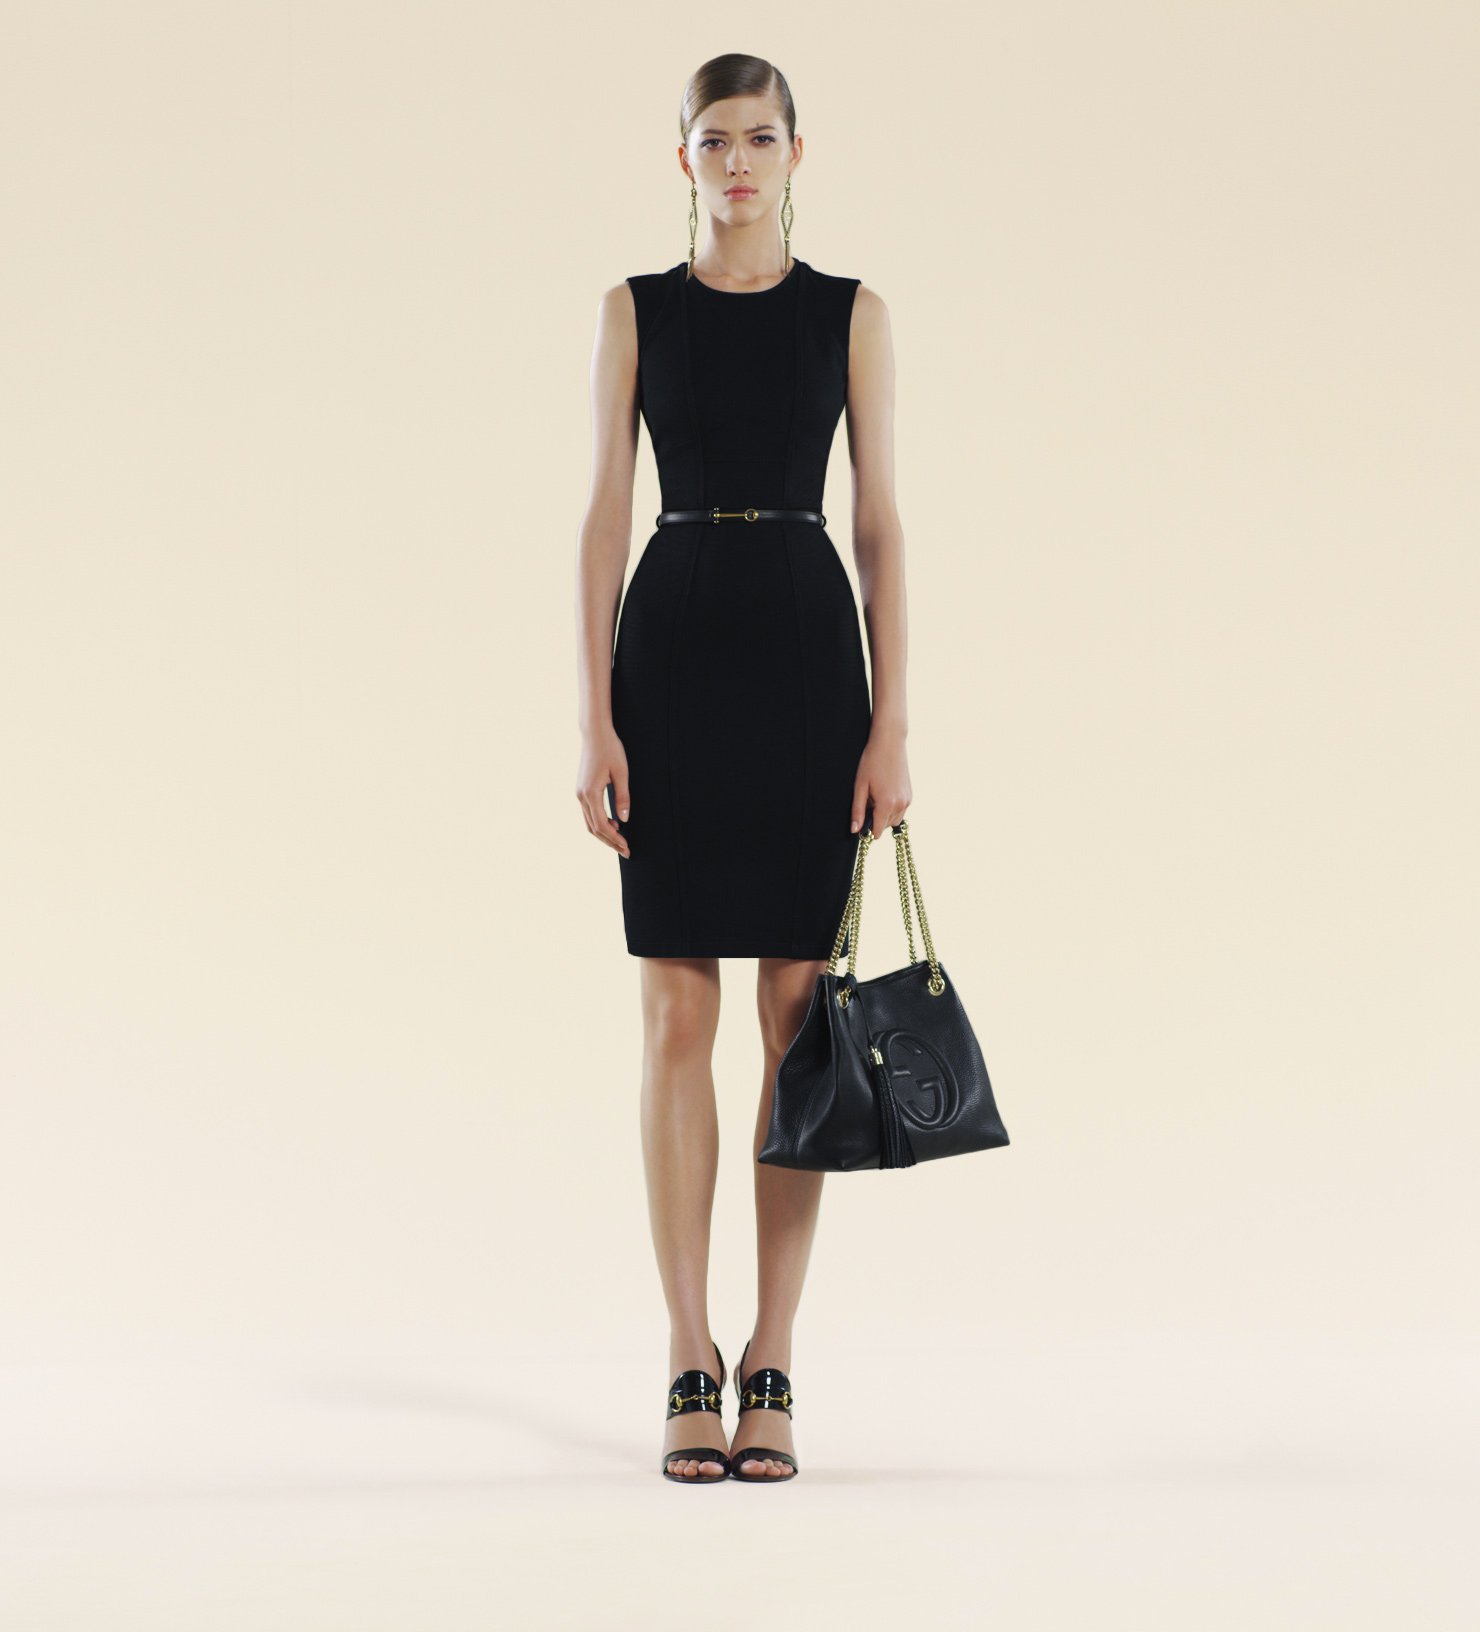 Gucci Black Shift Dress with Leather Belt | Lyst